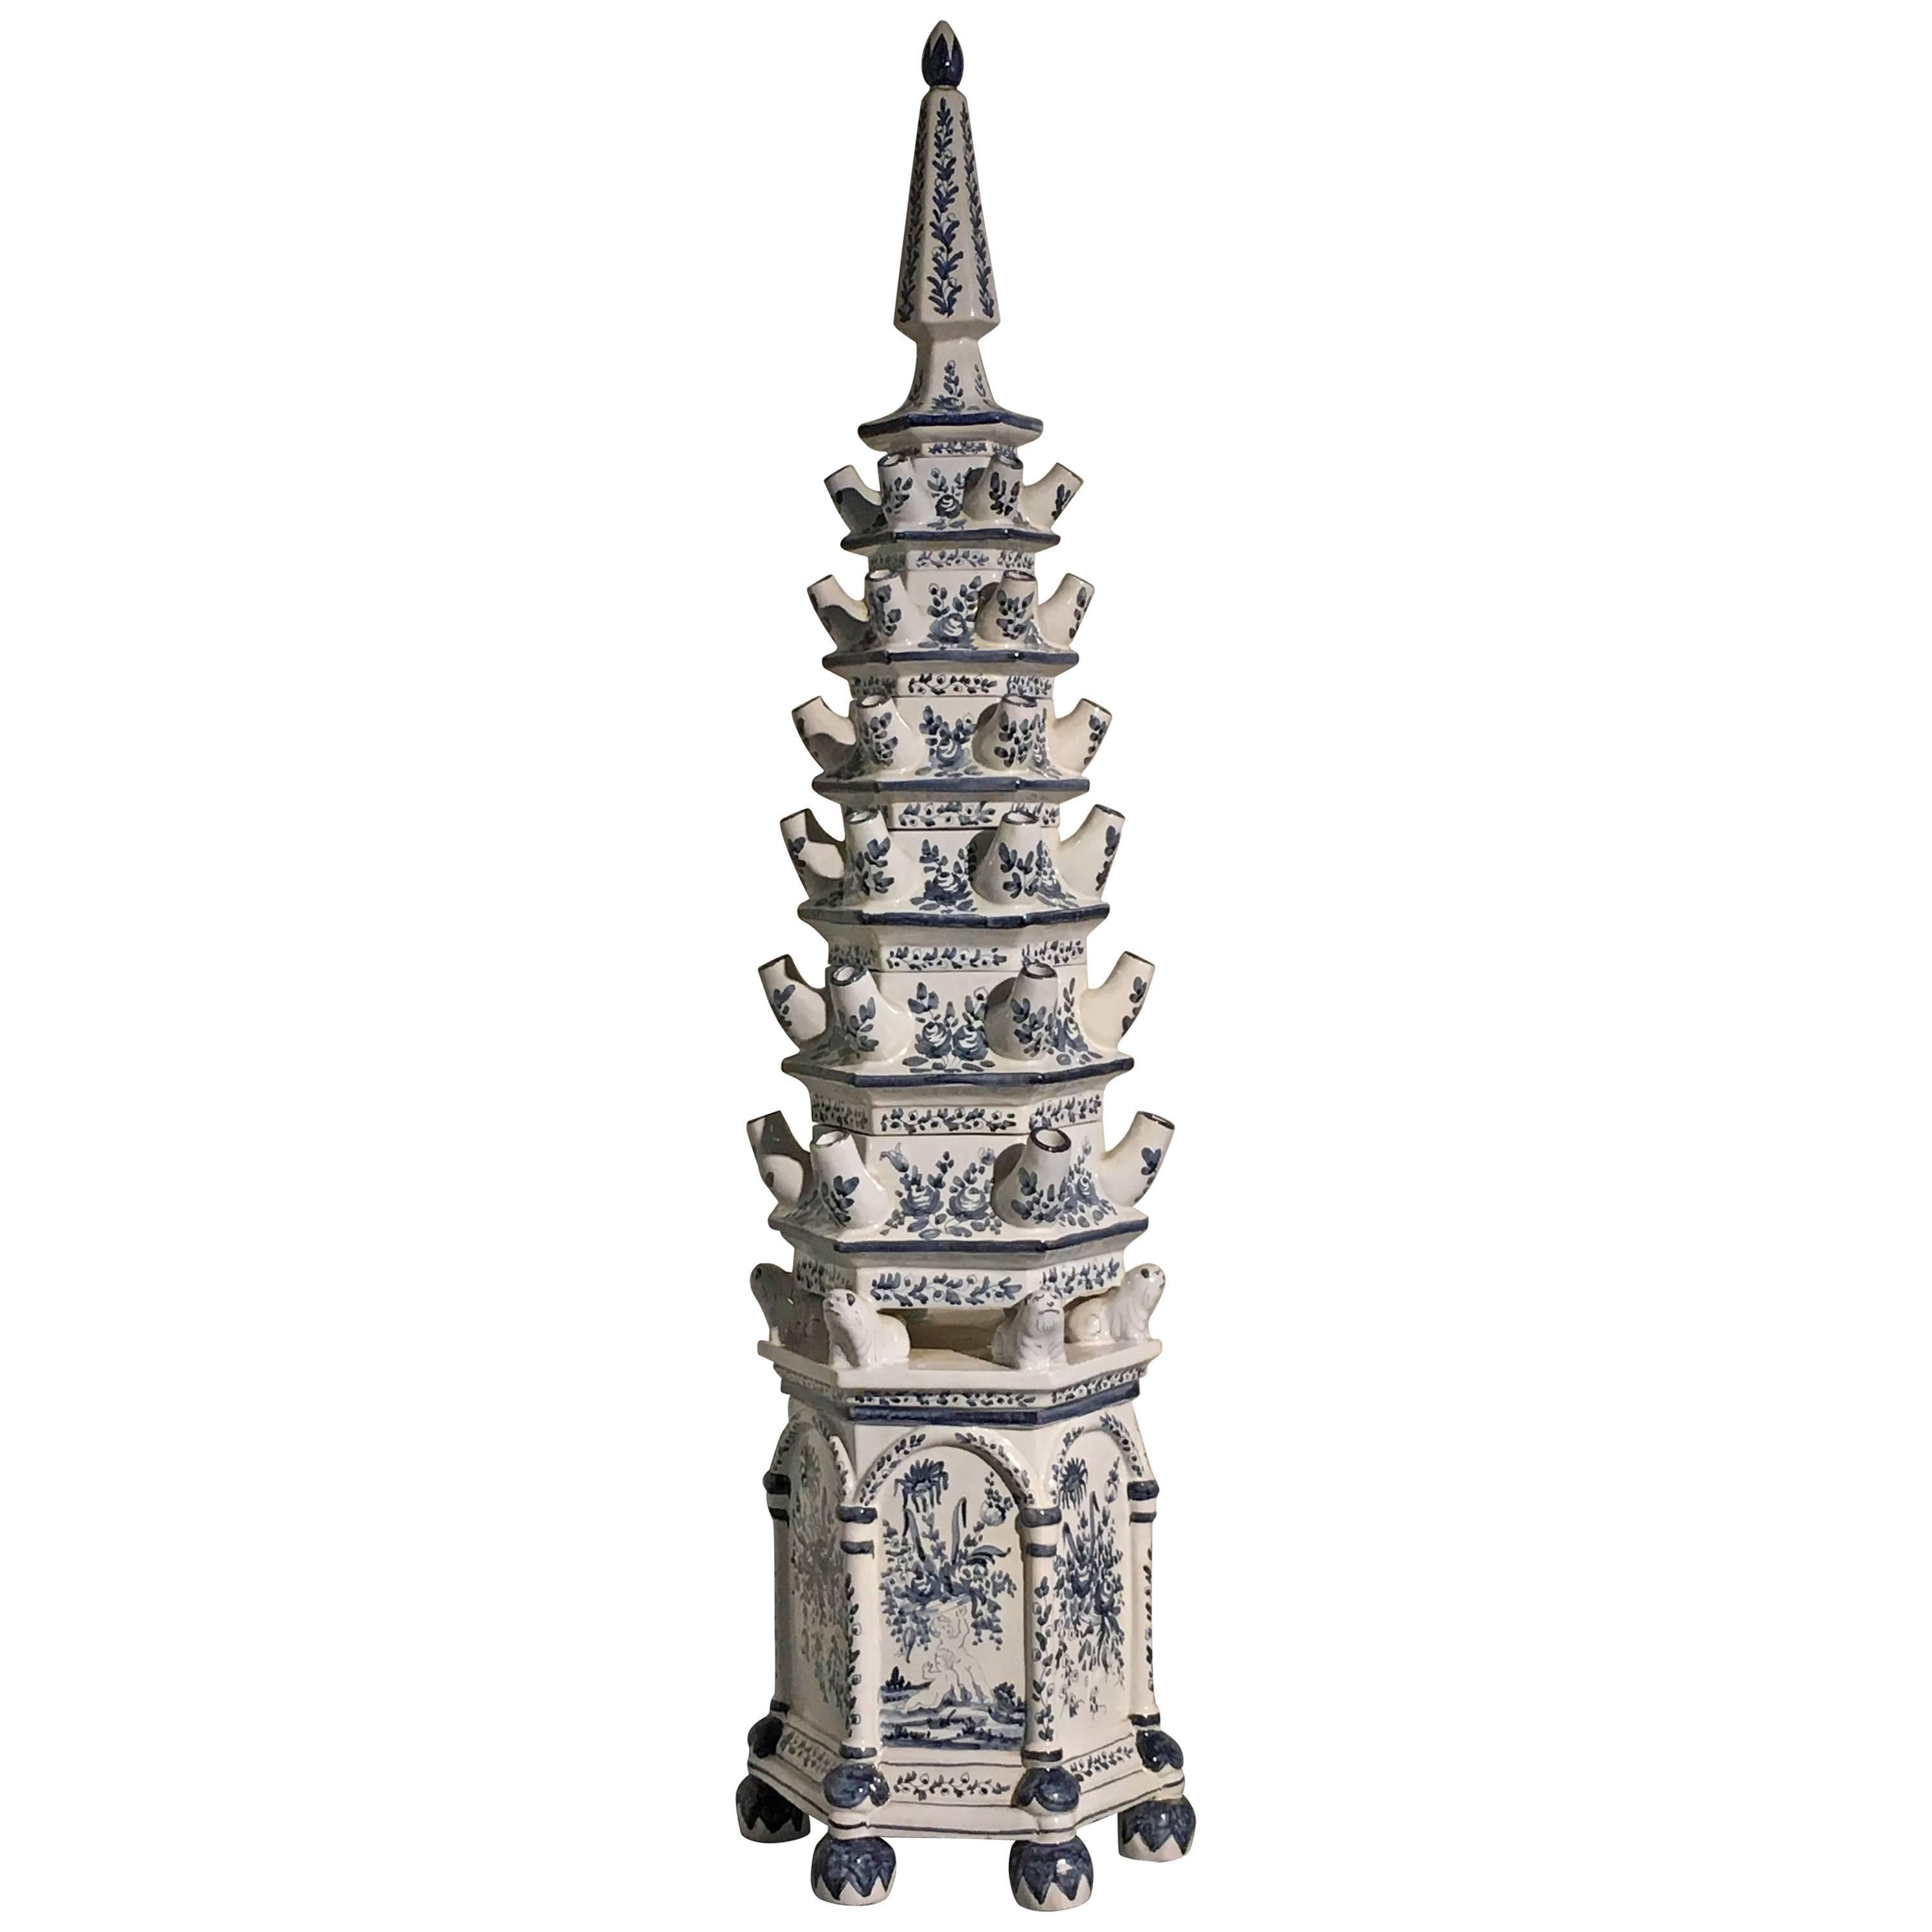 Italian Blue and White Painted Faience Pagoda Form Tulipiere, Mid-20th Century